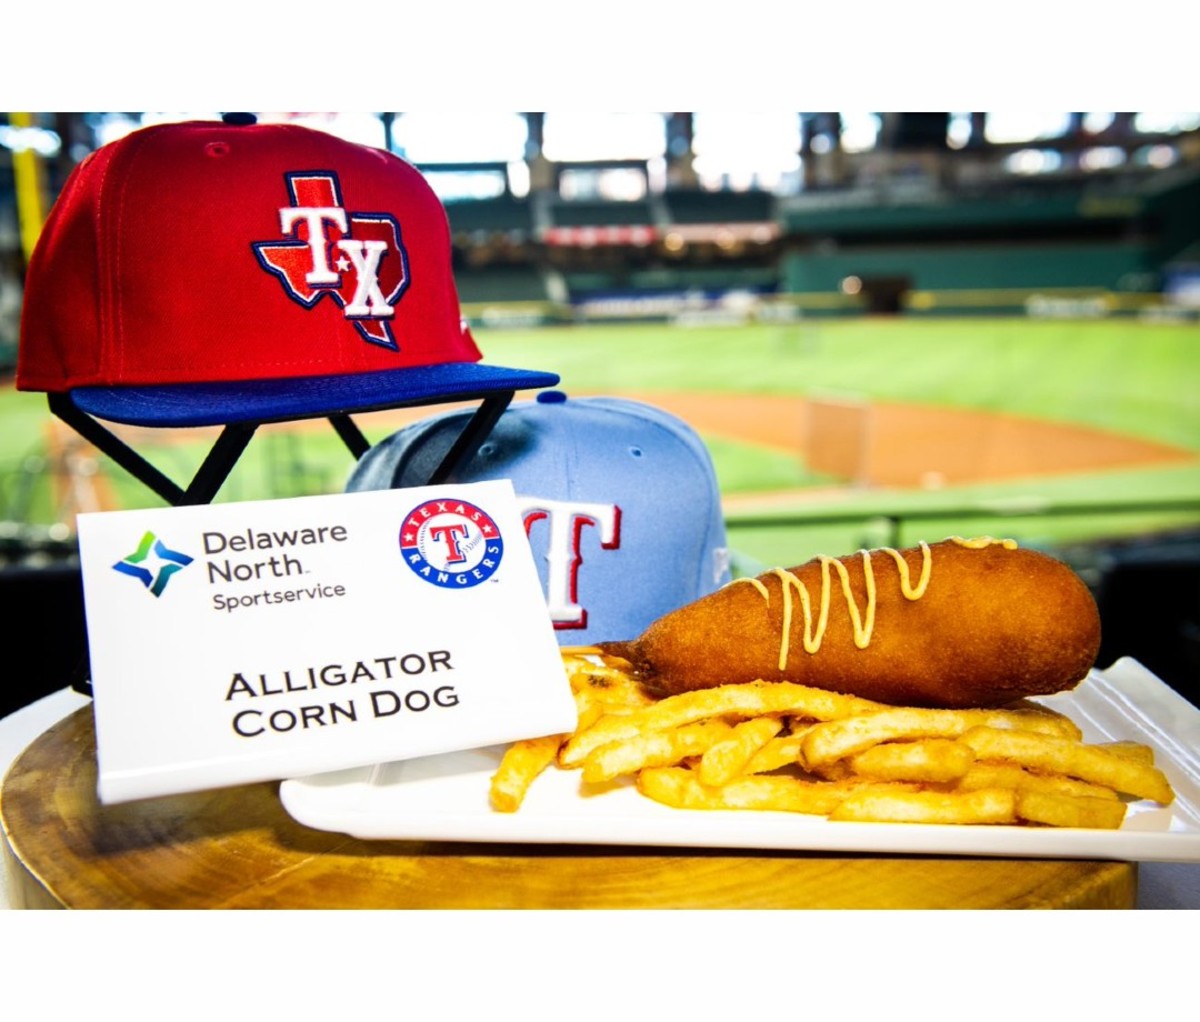 Corn dog with French fries on late with baseball hats and stadium in background